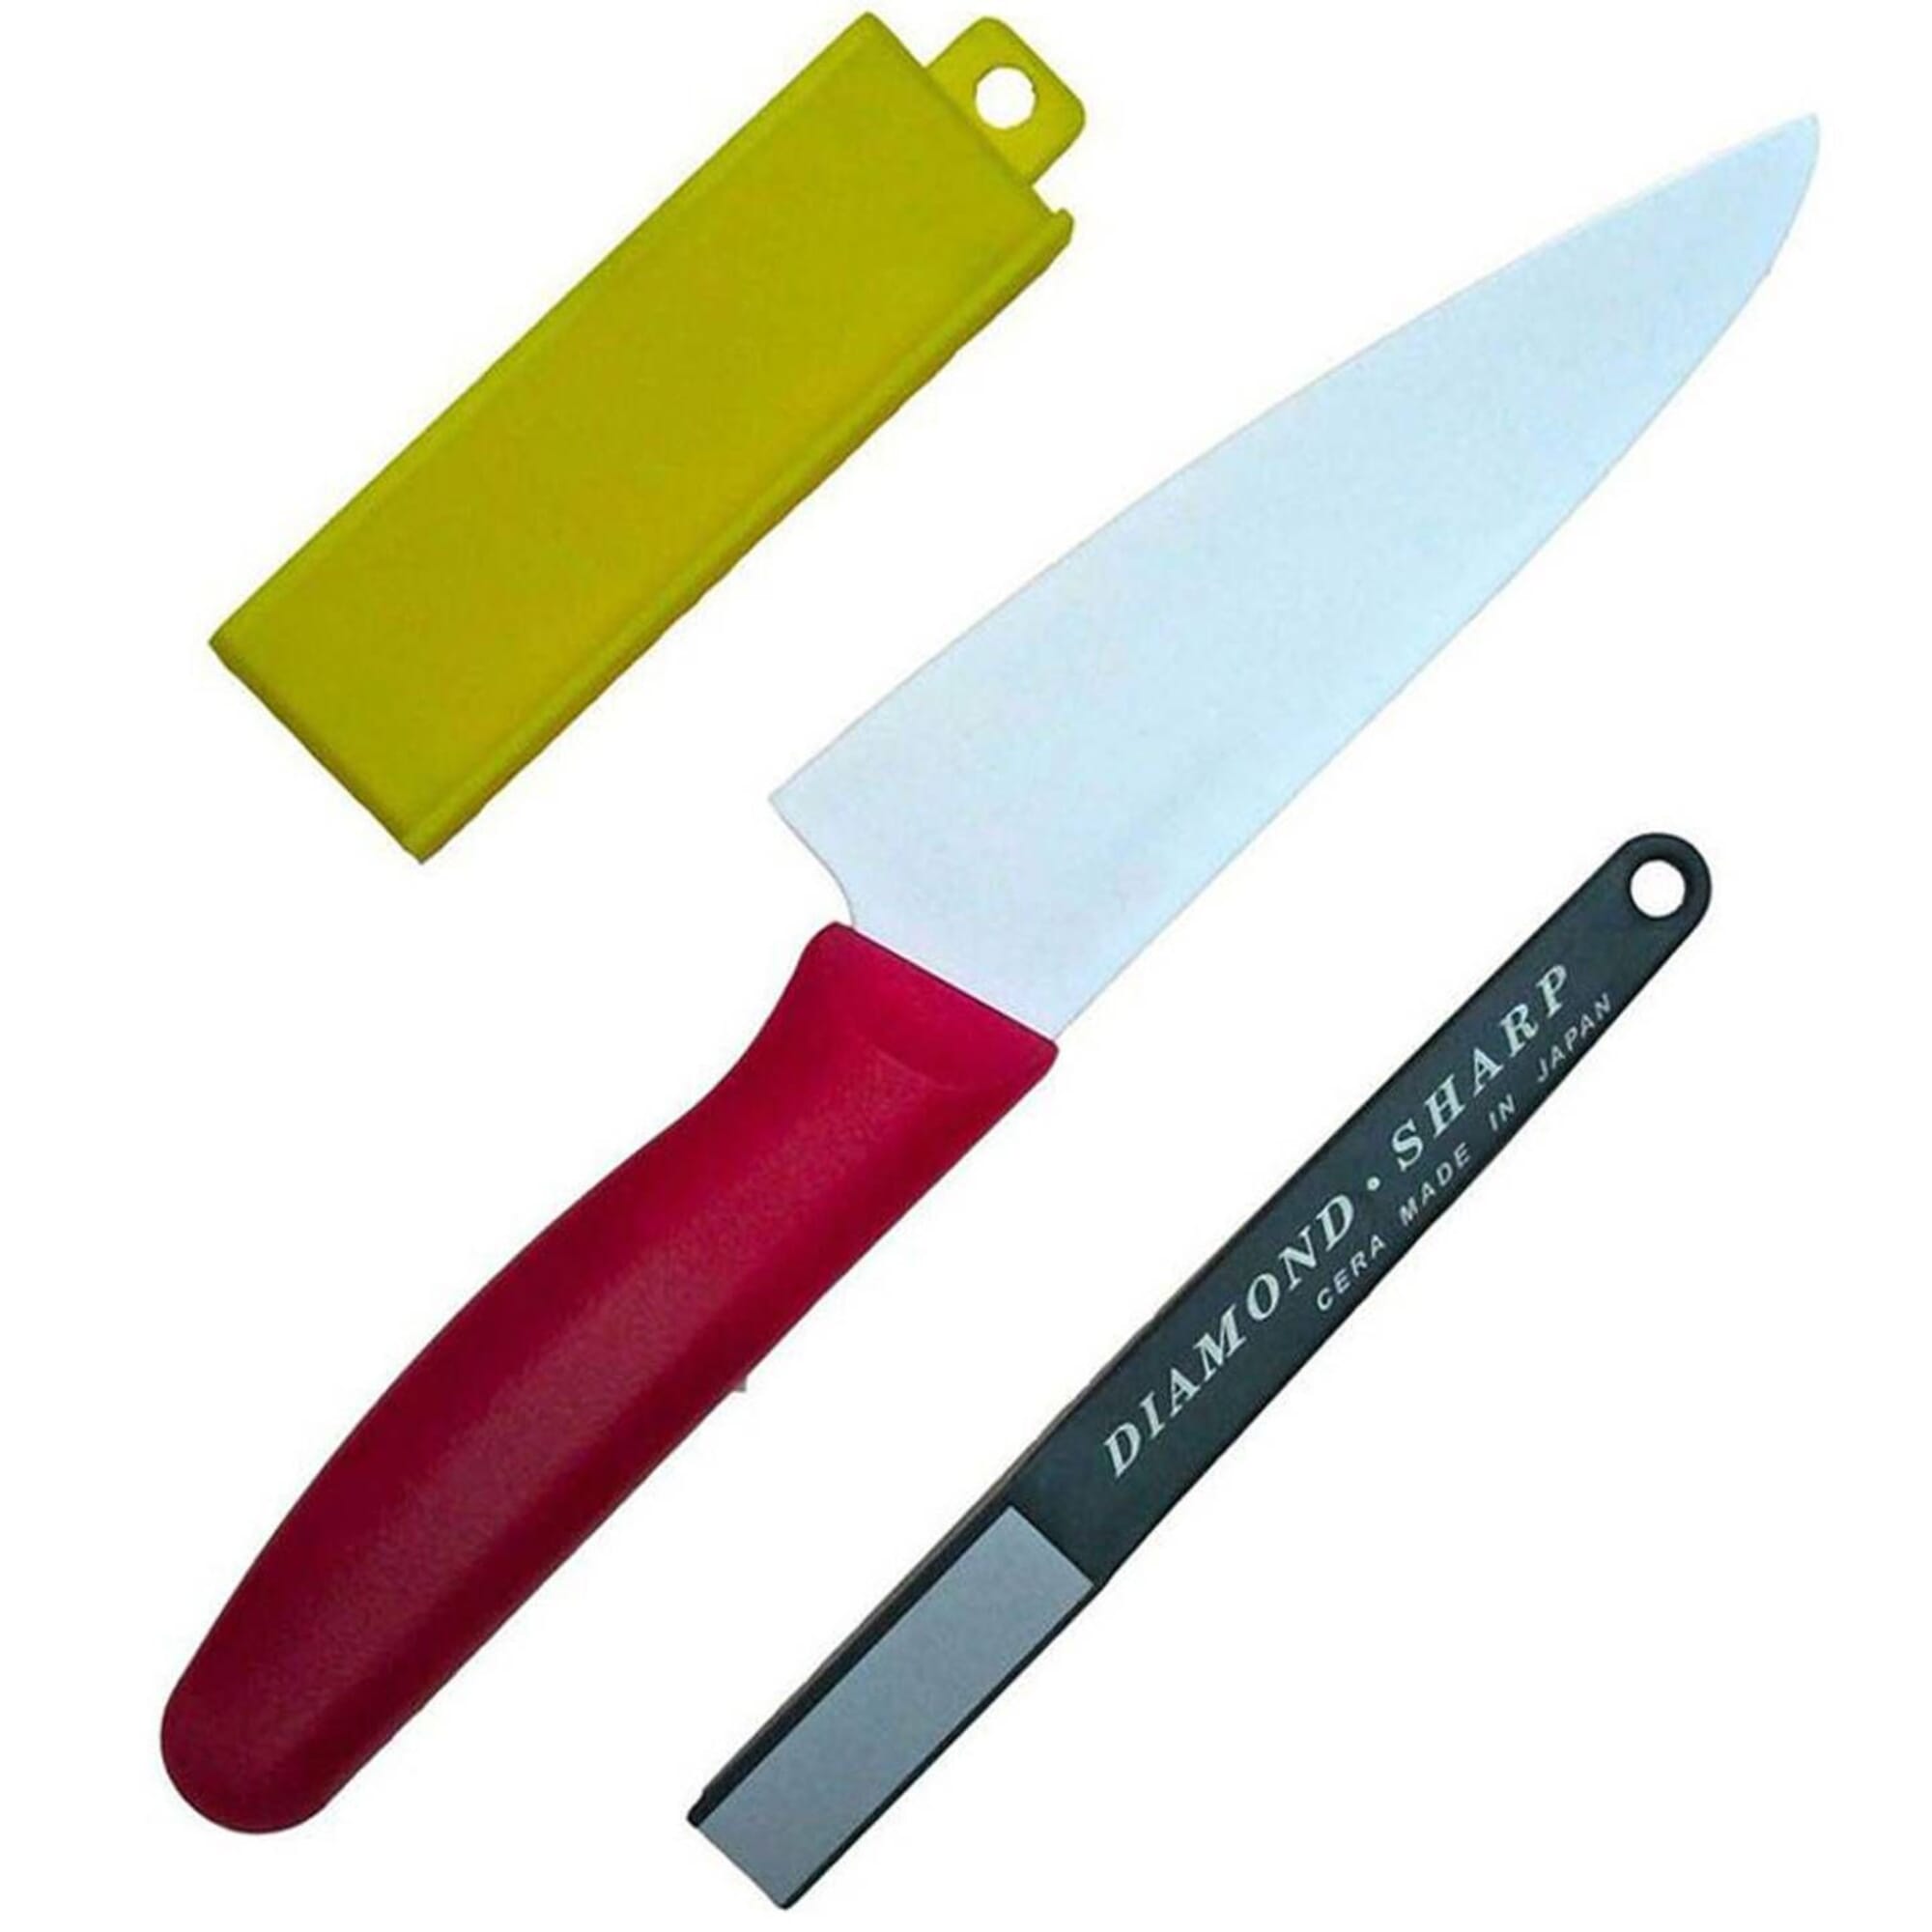 Diamond Painting Tool Knife Hand-Cut Canvas Cutter Carving Knife for Paper